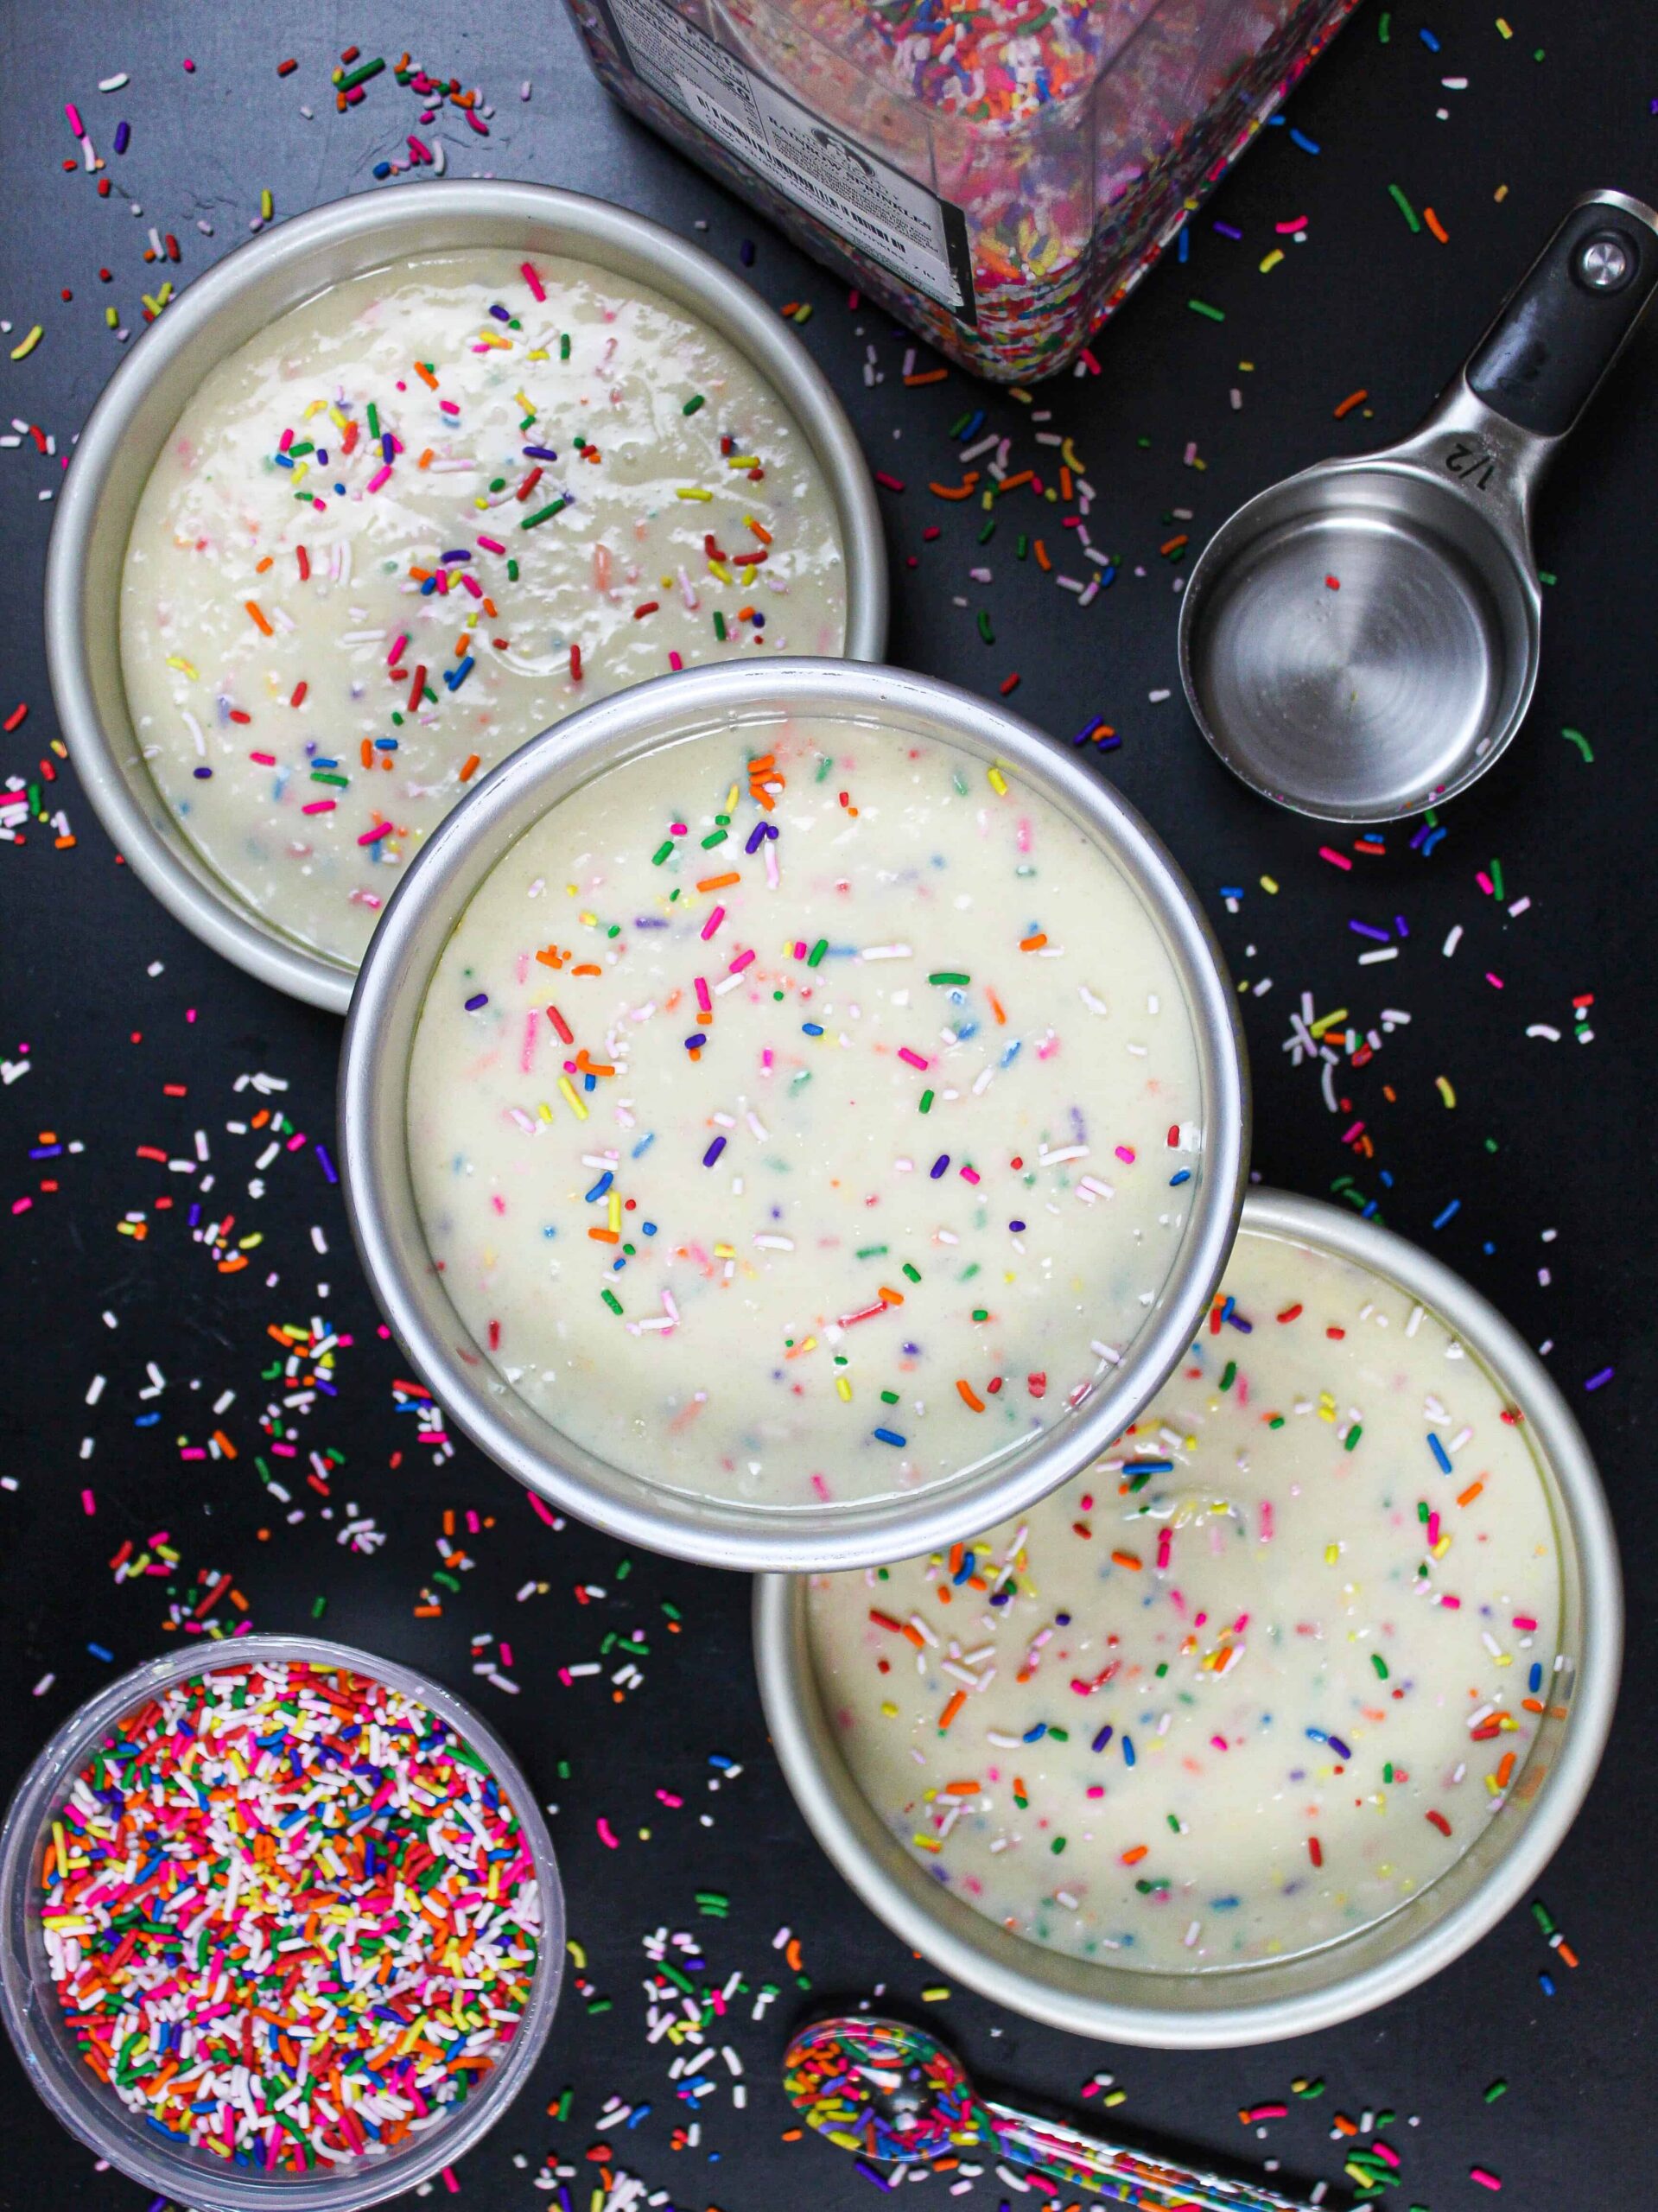 image of funfetti cake batter in 6 inch cake pans, ready to be baked